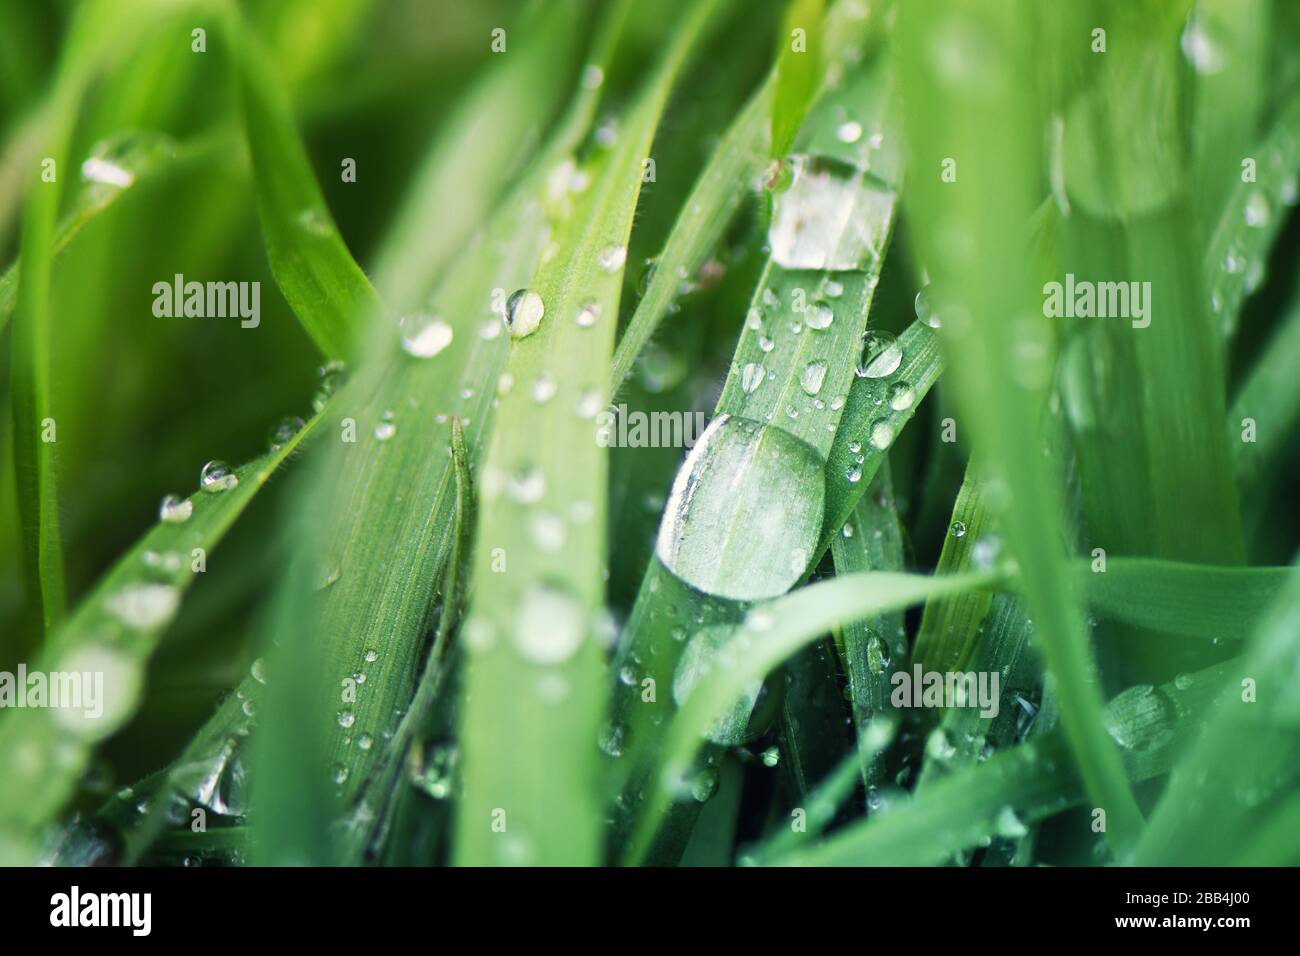 Water drops on green grass, close up Stock Photo